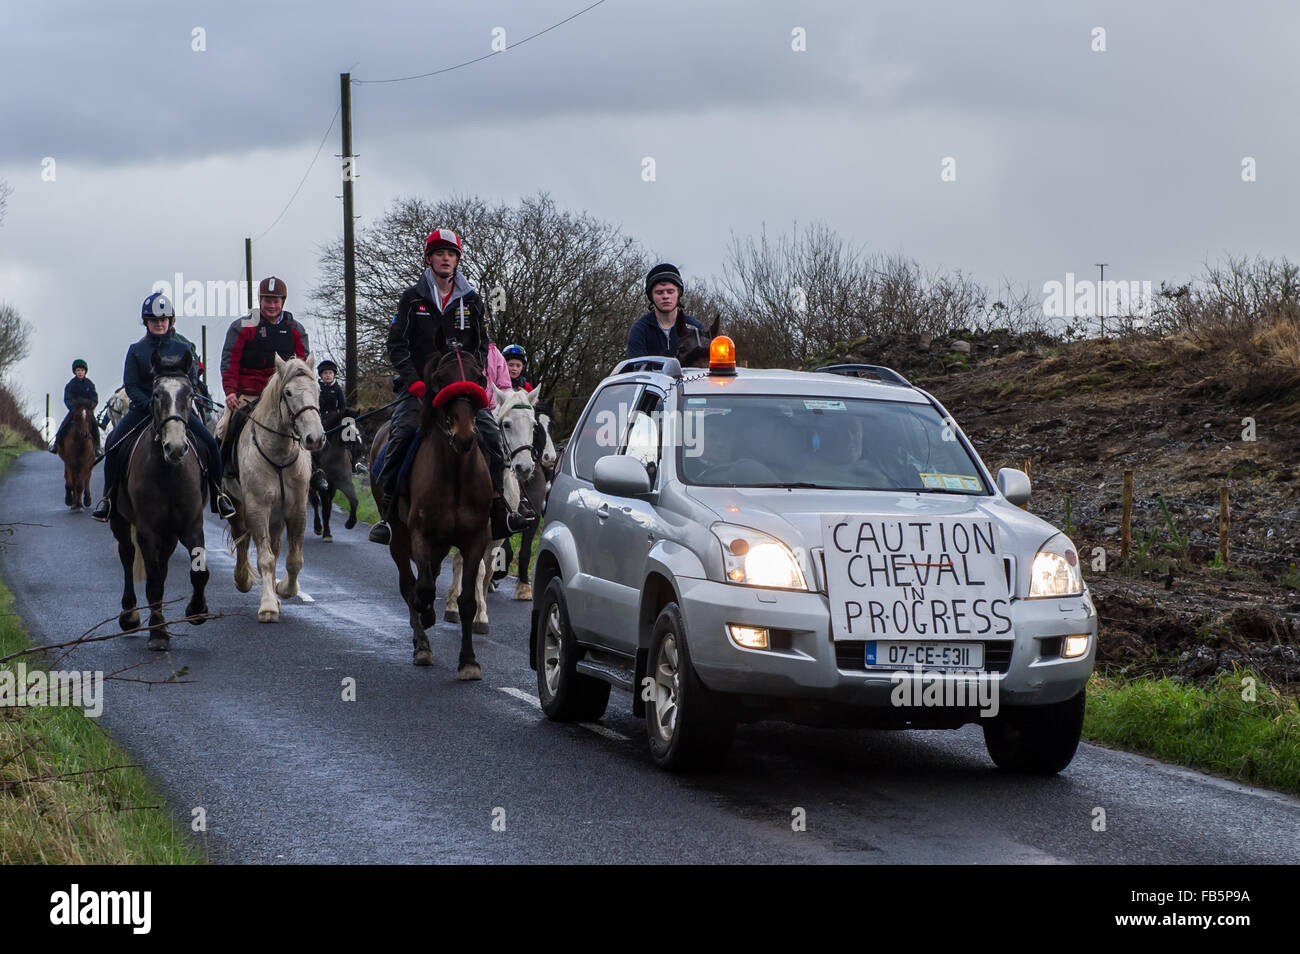 Drimoleague, Ireland. 10th January, 2016. The safety car heads up the horse riders during the Drimoleague to Drinagh Cheval. The Cheval was held to raise funds for COPE Foundation. Credit: Andy Gibson/Alamy Live News Stock Photo